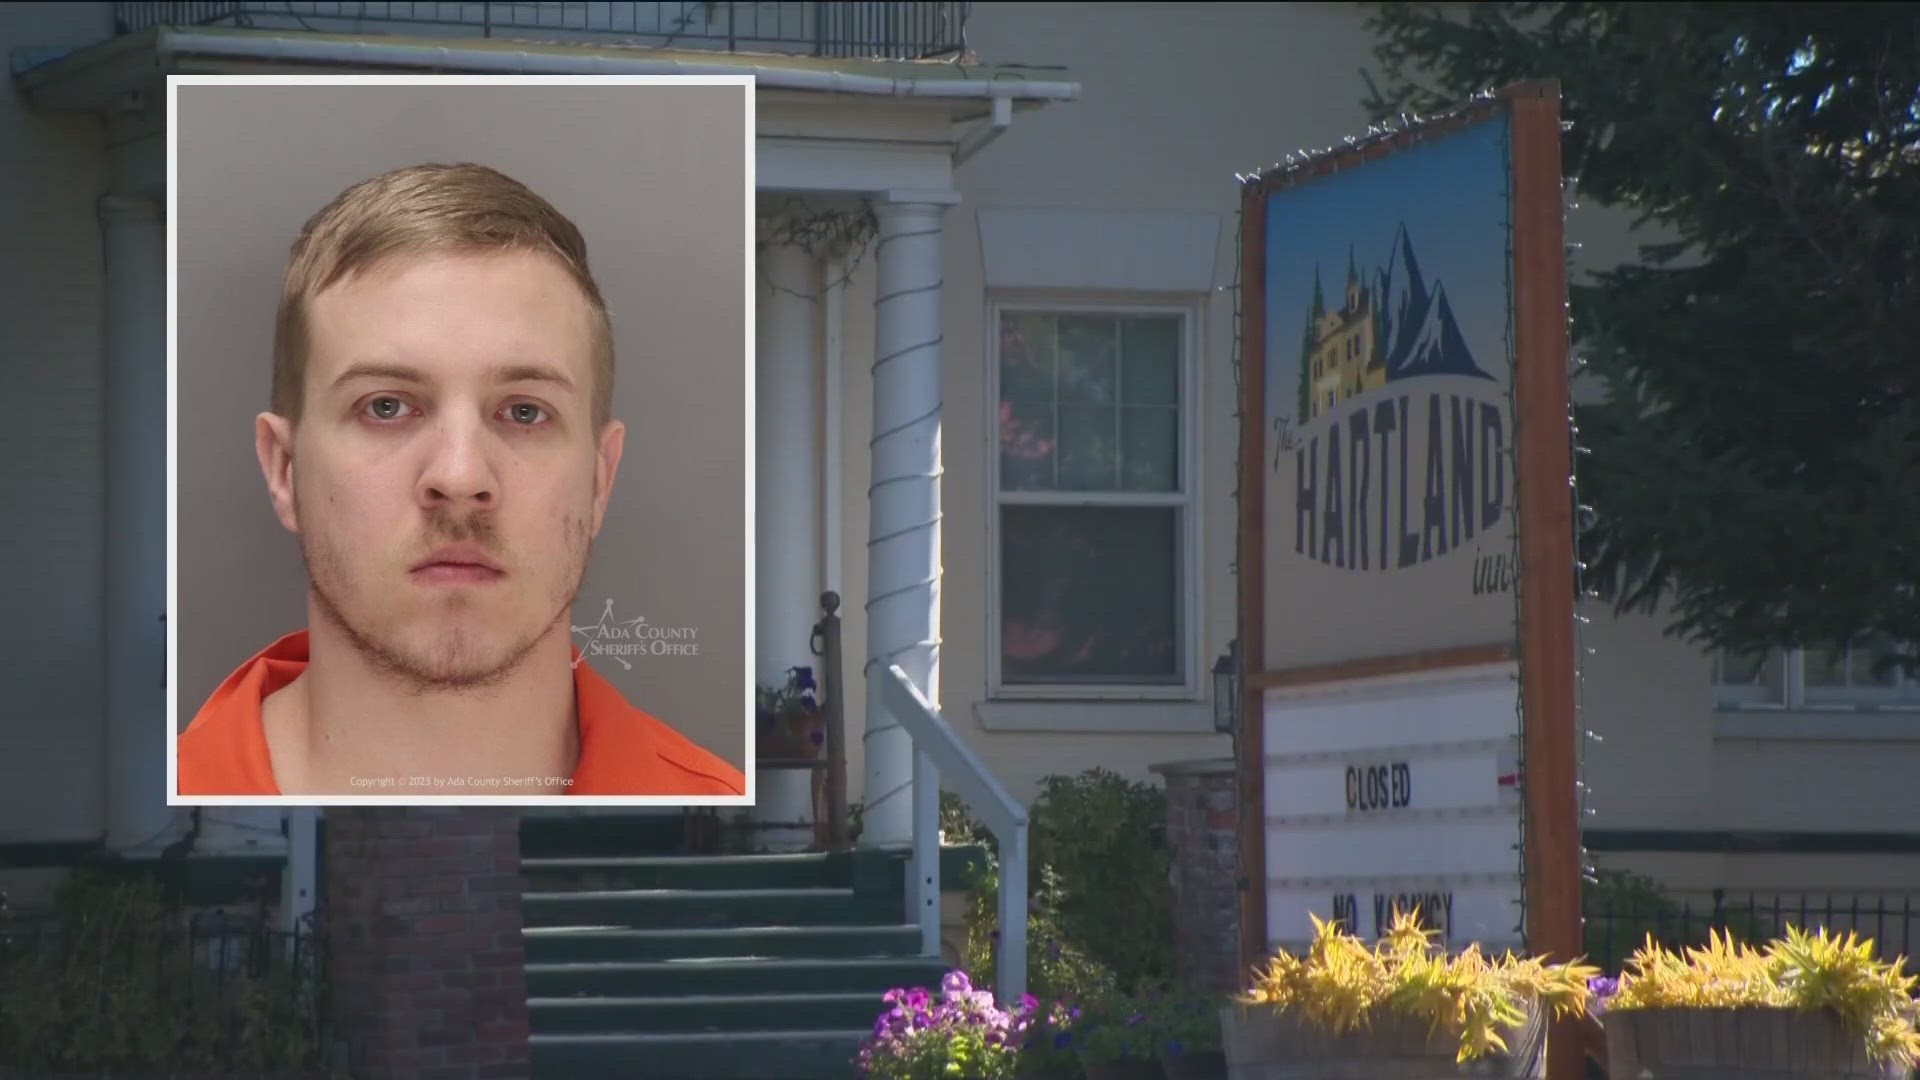 KTVB obtained court records from Adams County on Monday, showing a psychologist found Hart competent in March.